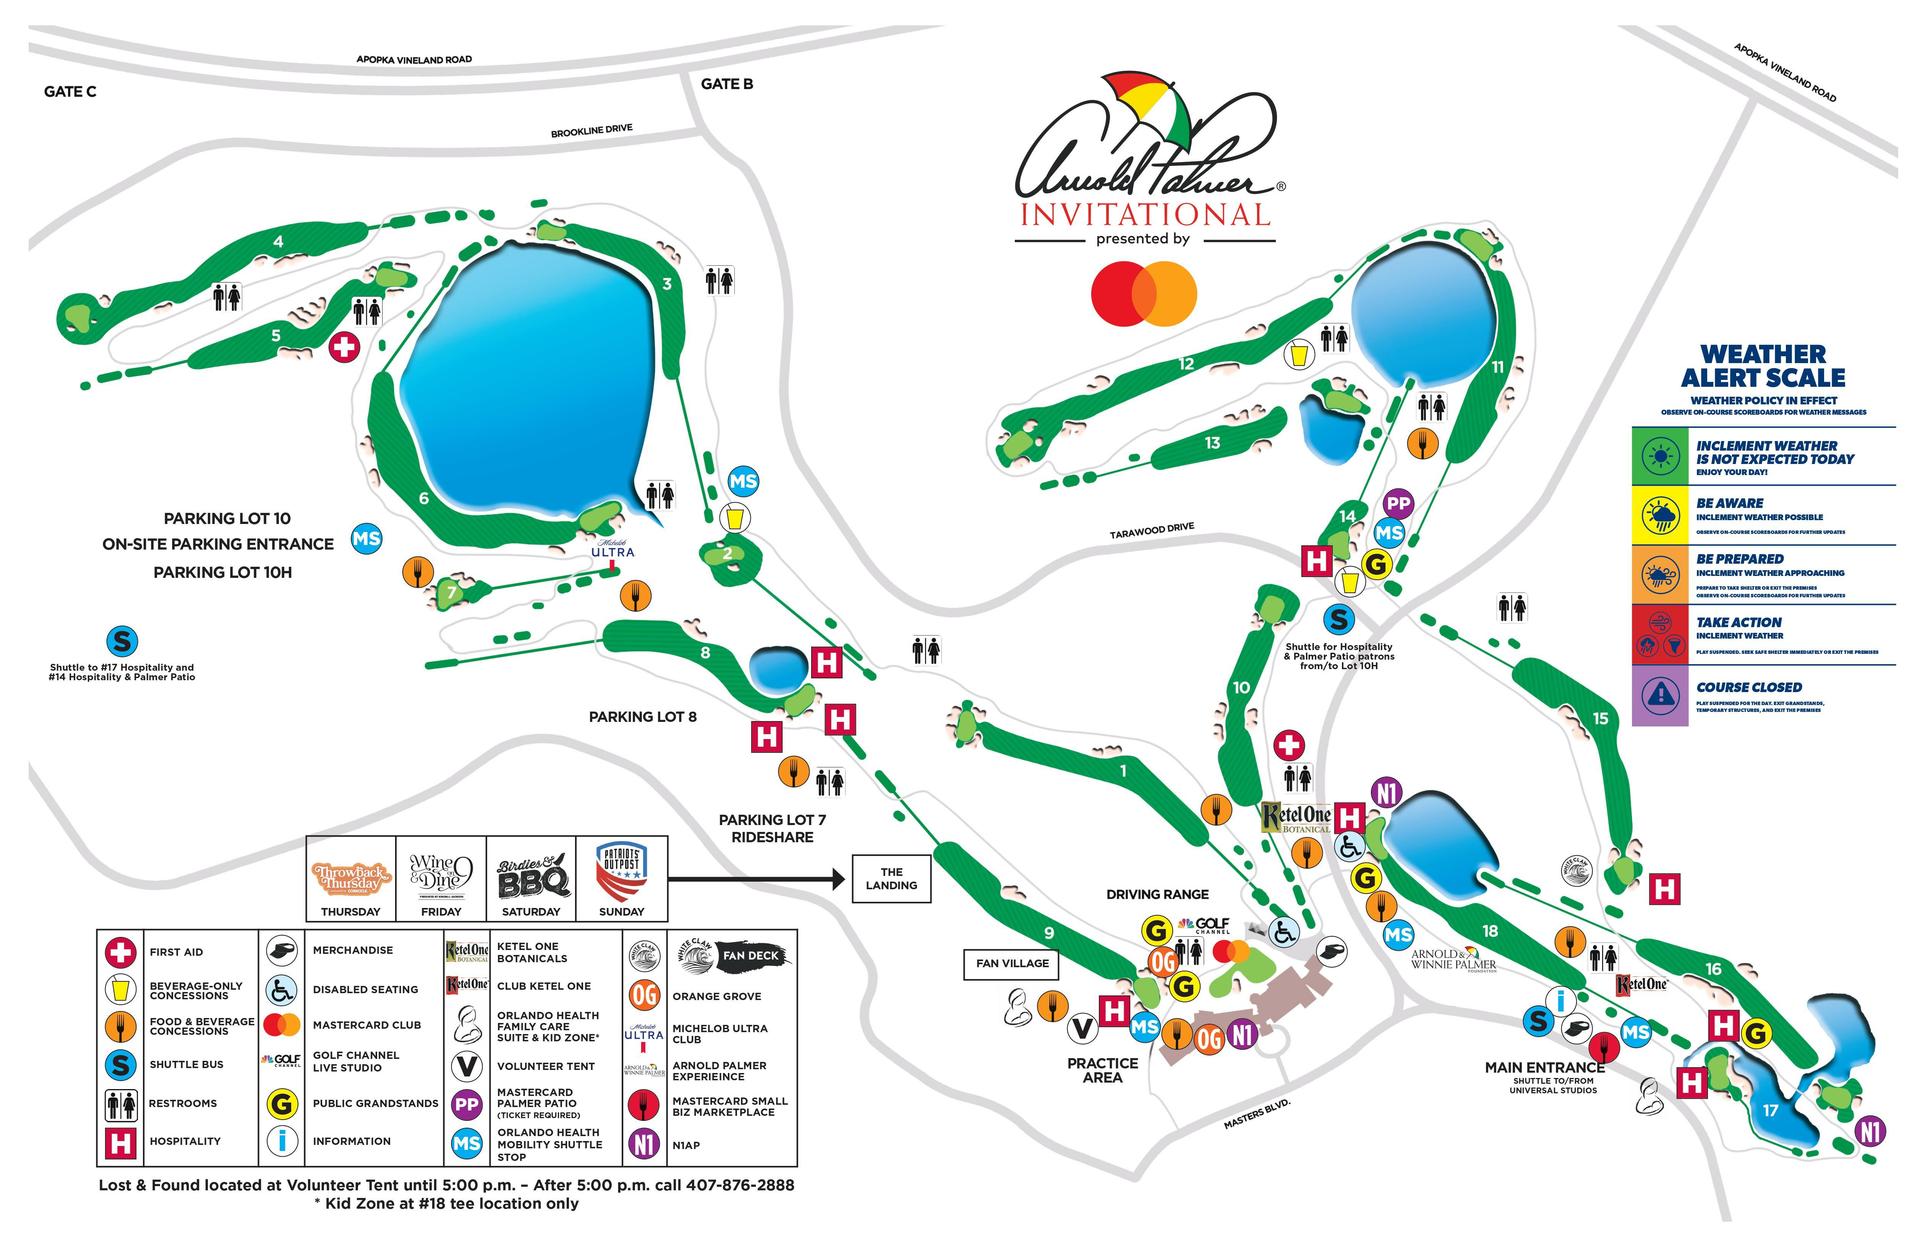 Map of the golf course